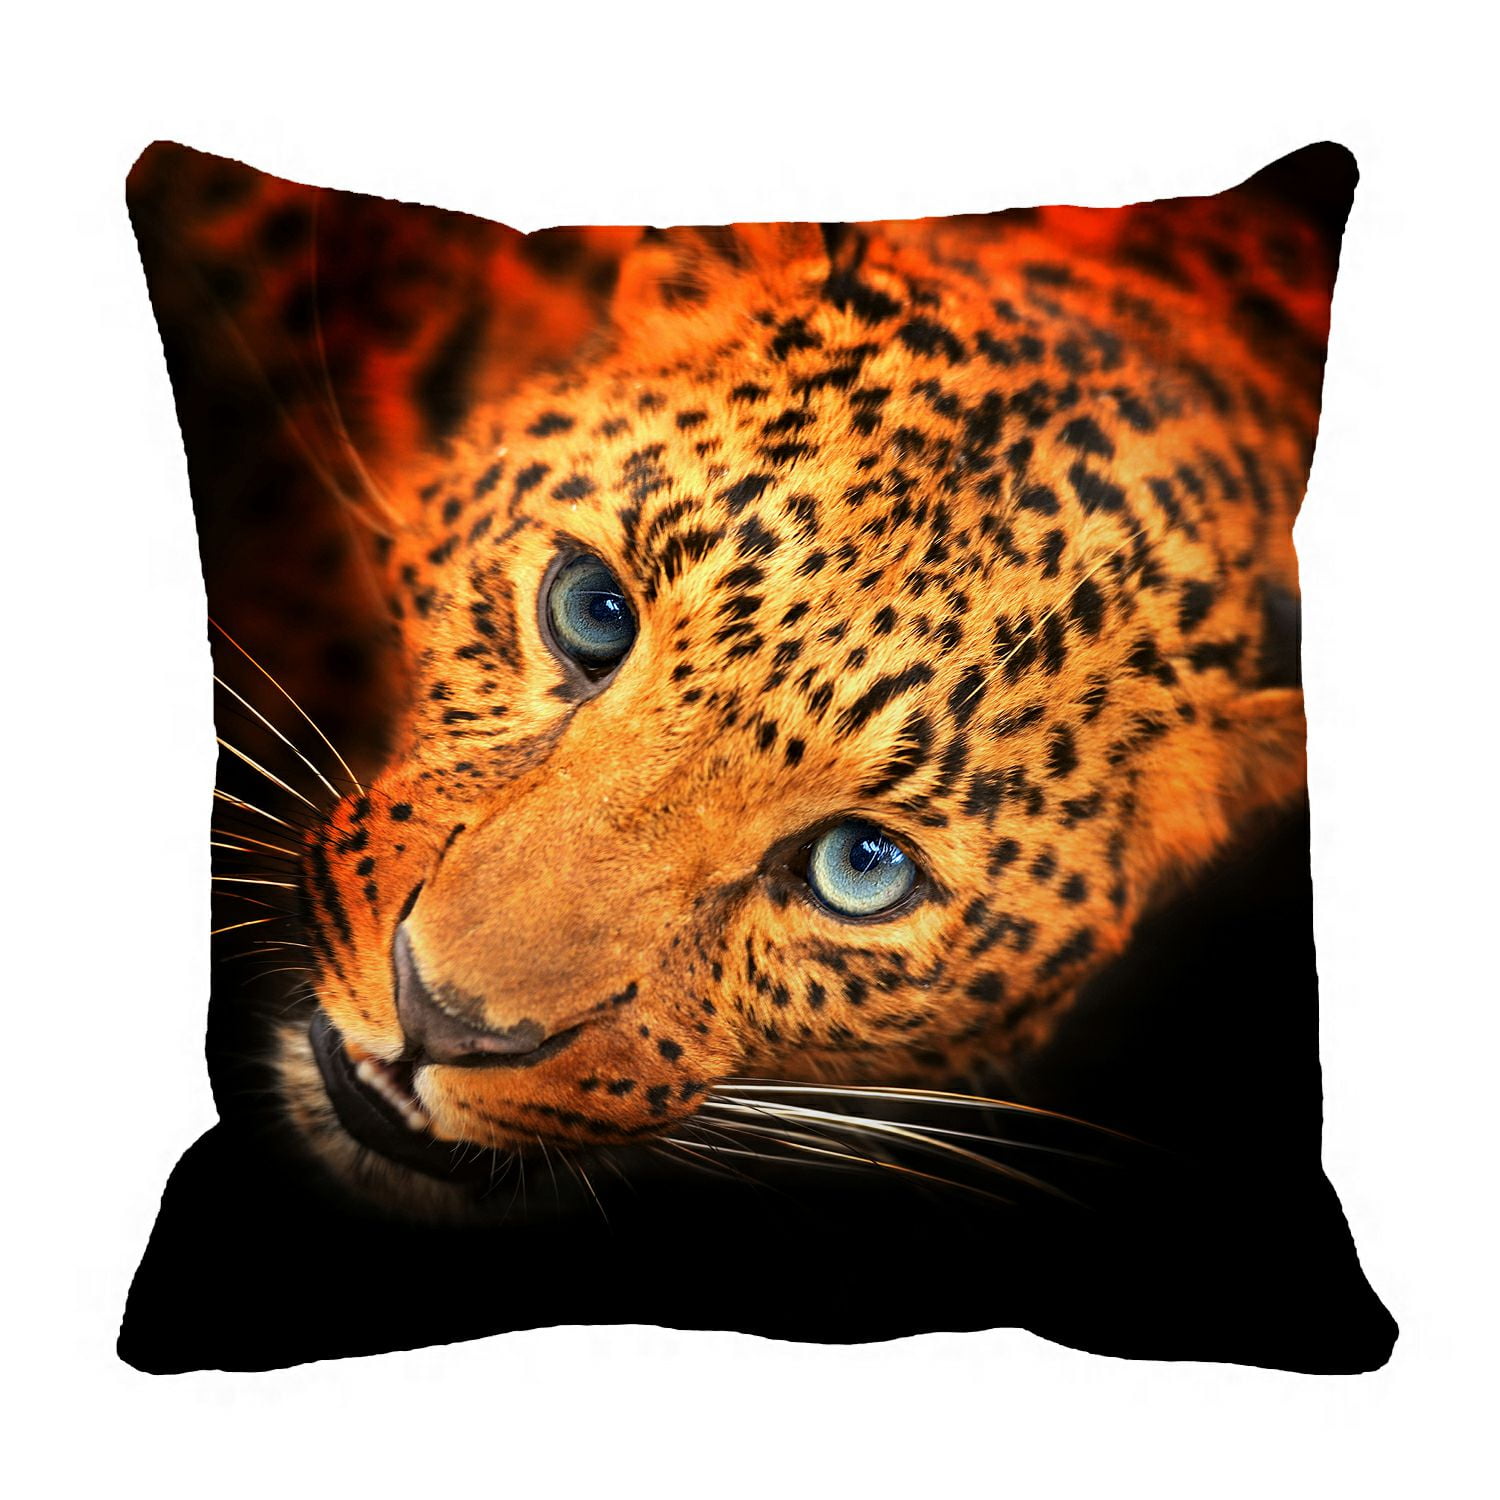 It's All About Squirrels Squirrely and Thriving Funny Lover Outdoor Animal Throw Pillow Multicolor 18x18